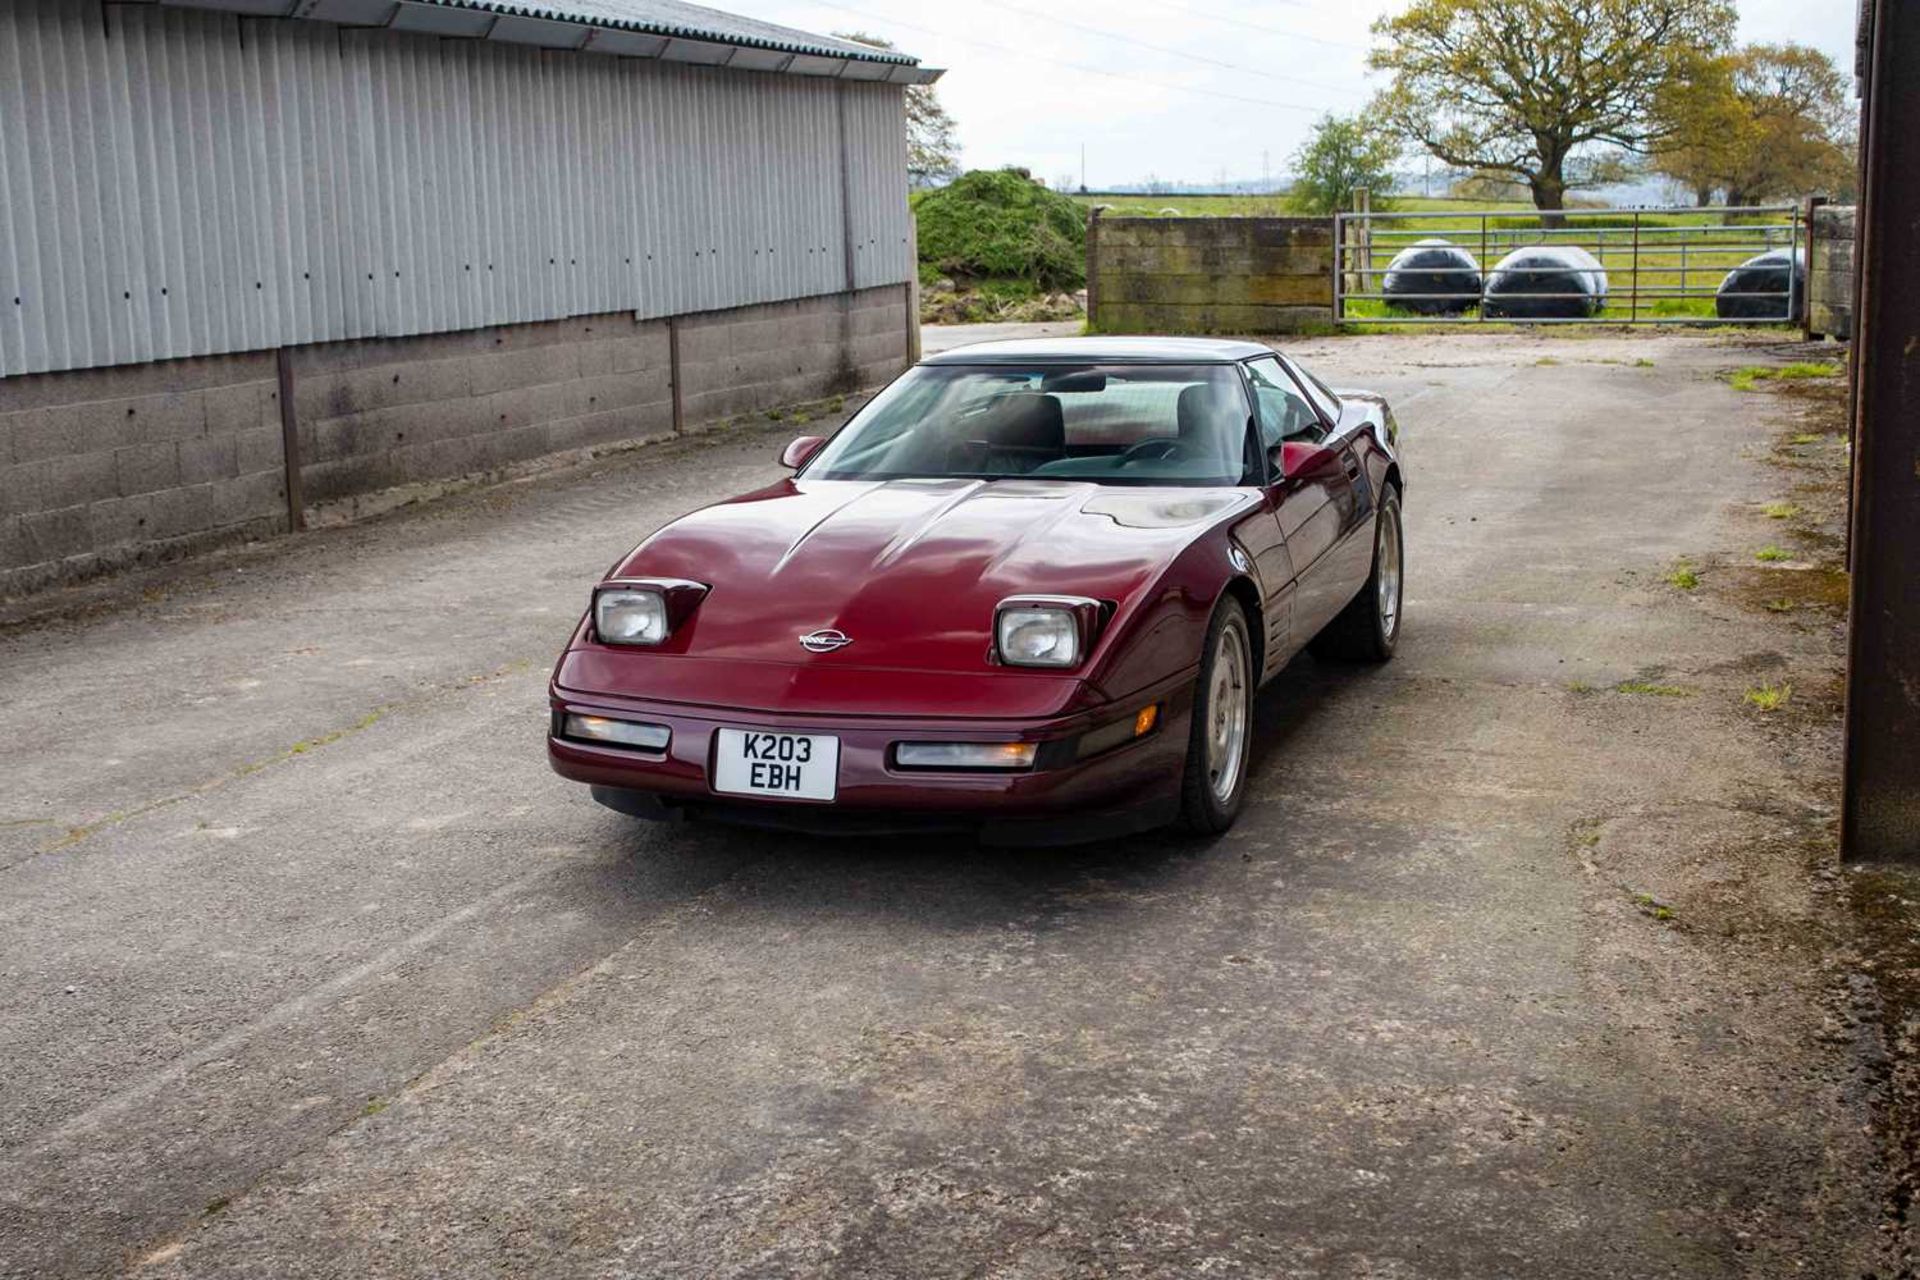 1993 Chevrolet Corvette C4  The highly sought-after 40th Anniversary Edition  - Image 9 of 78